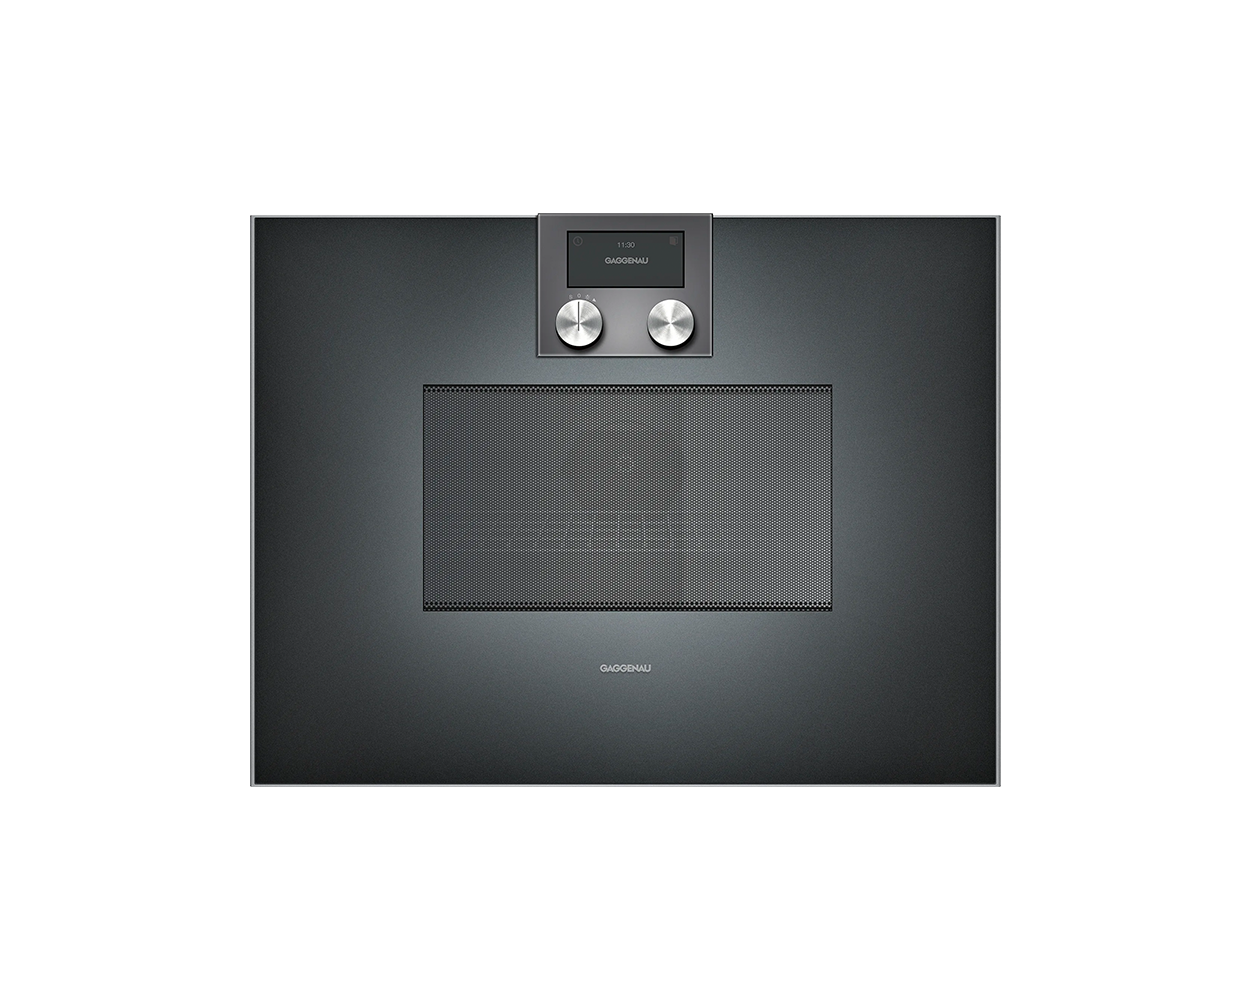 Luxury kitchen appliance brand Gaggenau 400 series combi-microwave oven. Buy in the UK with Krieder.